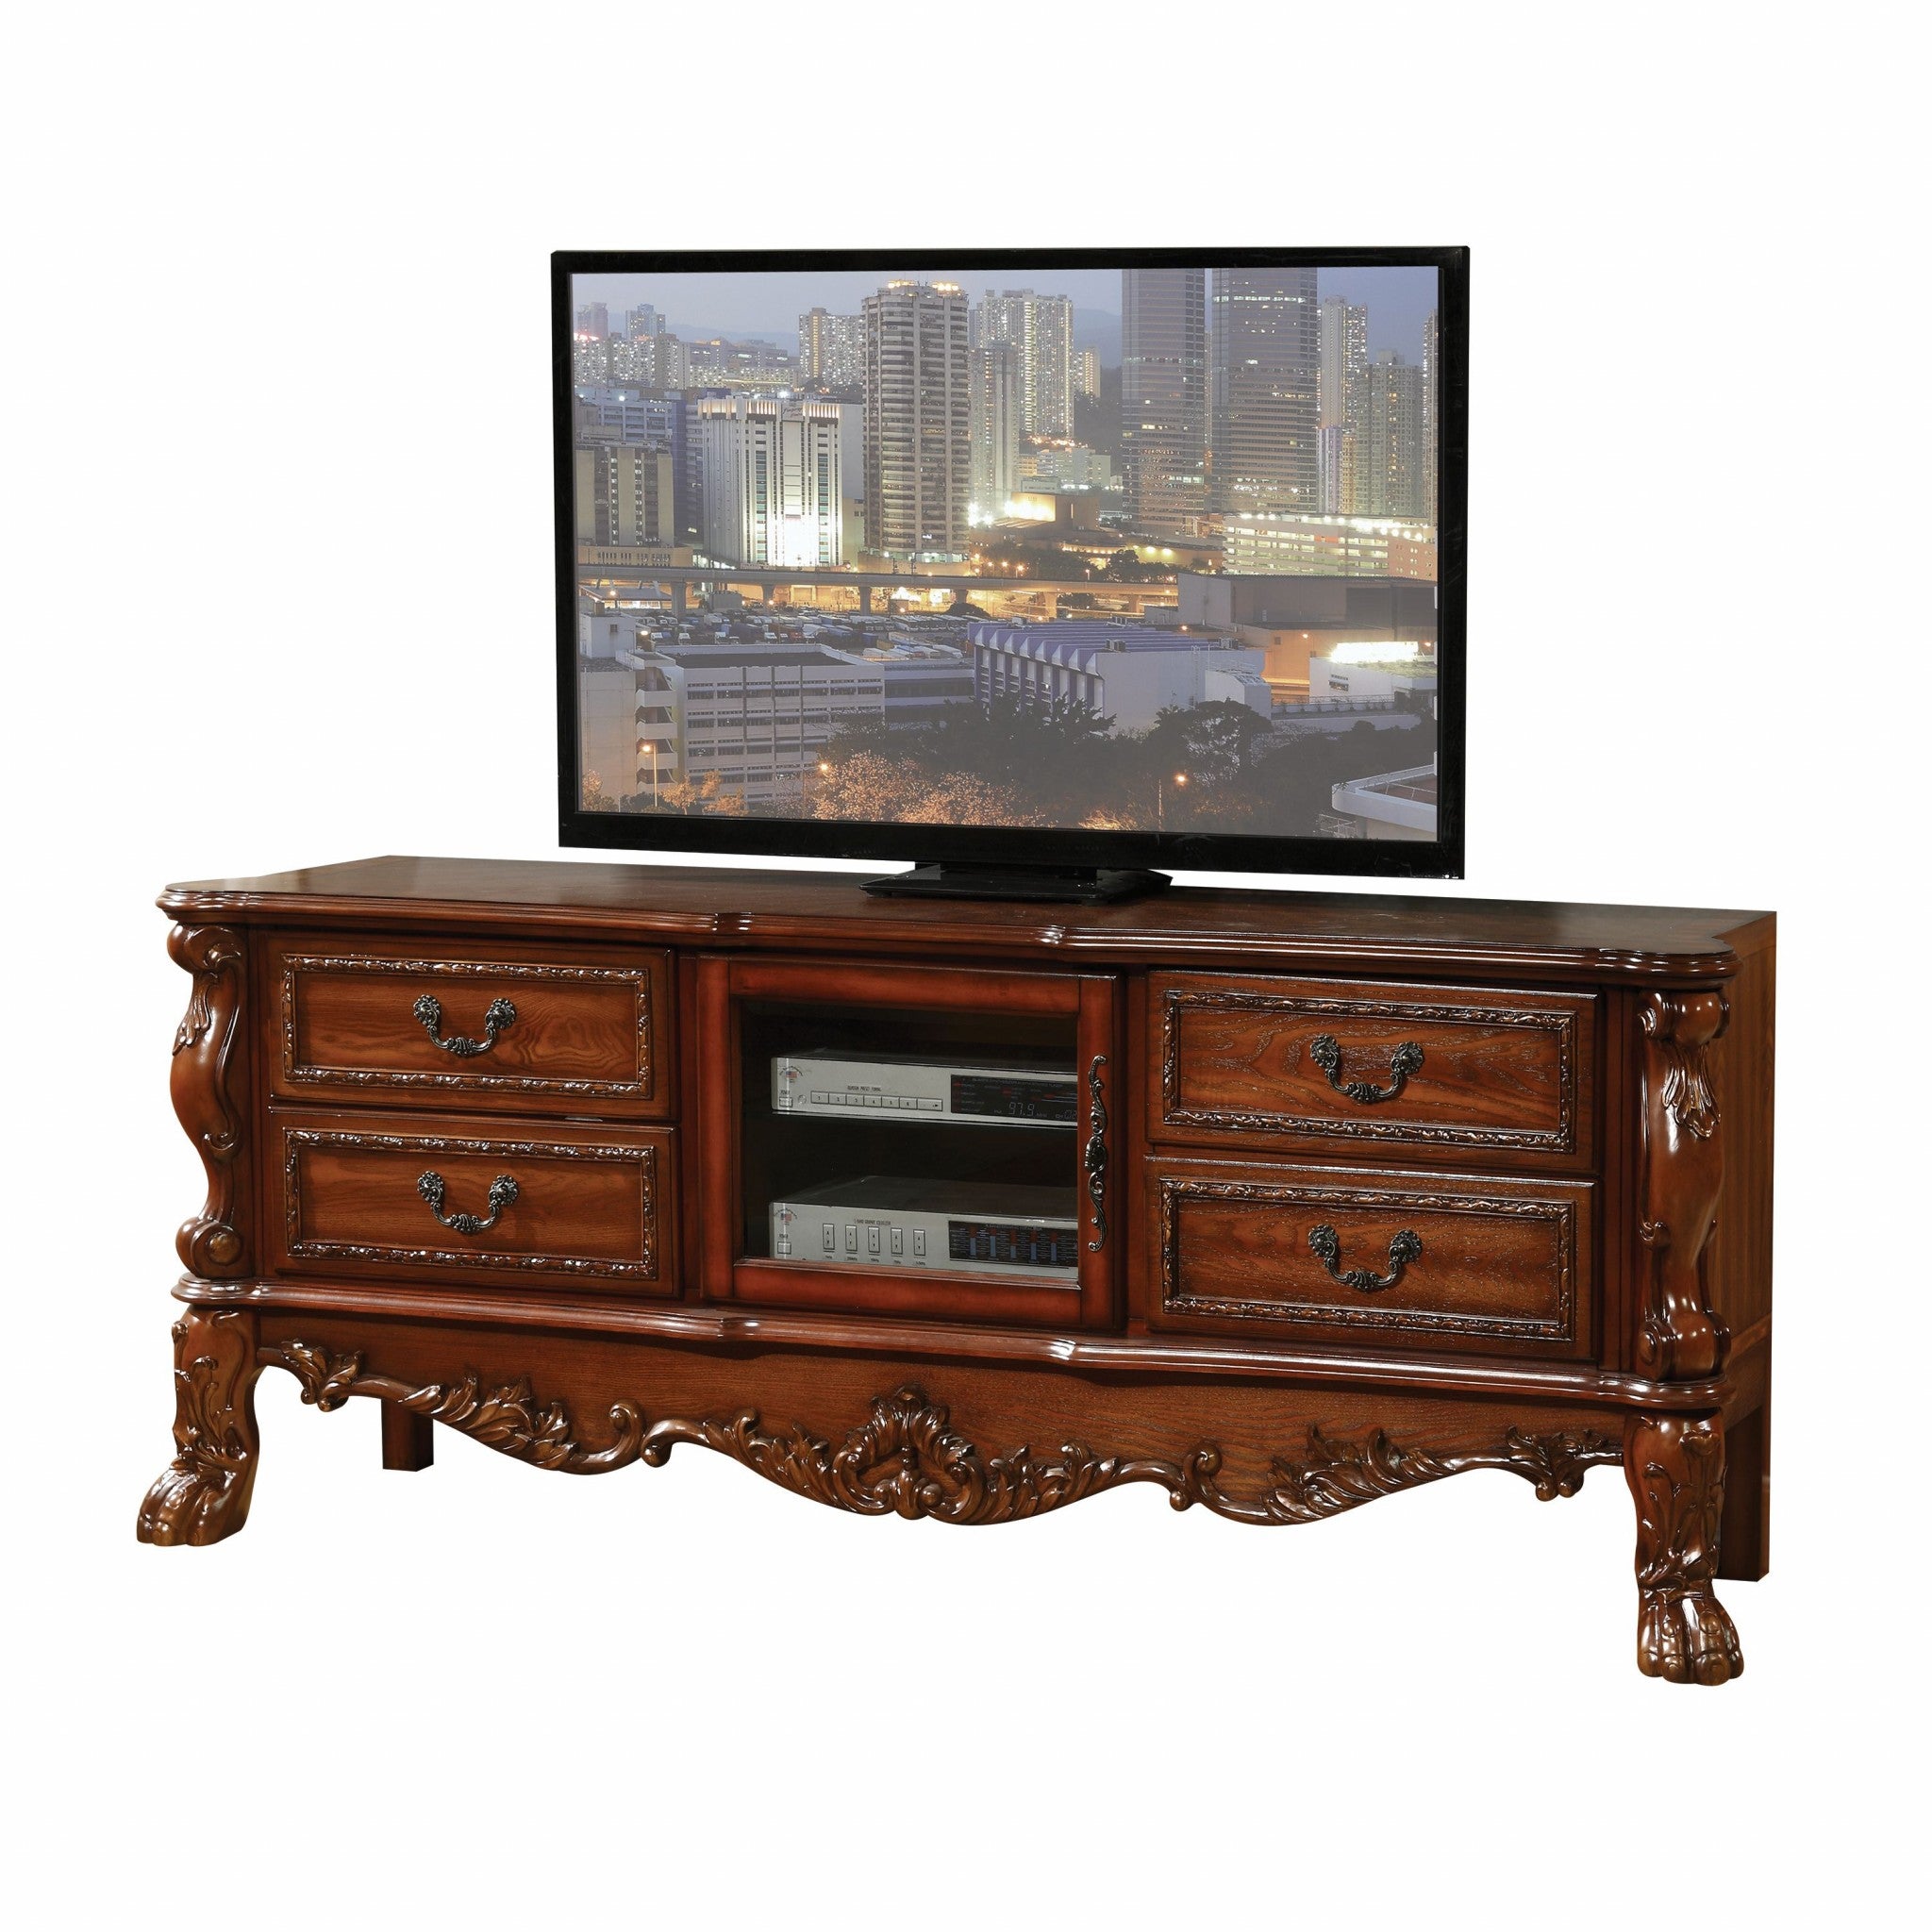 21" X 74" X 31" Antique Platinum Wood Poly Resin Glass Tv Console